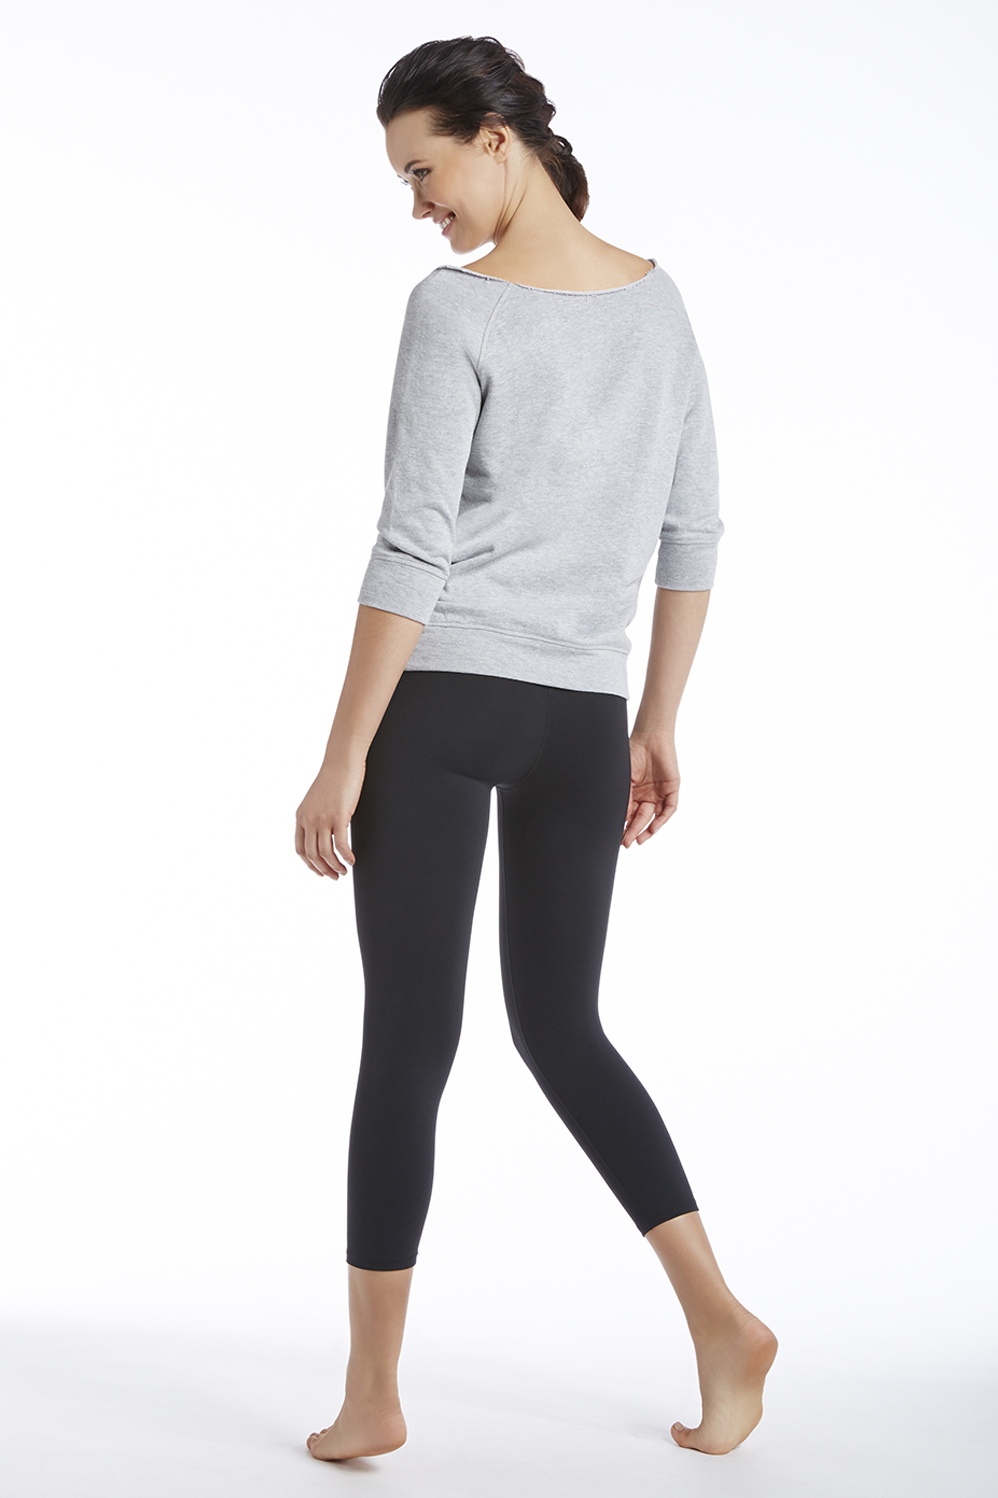 Glimmer Outfit - Get great athletic wear at Fabletics